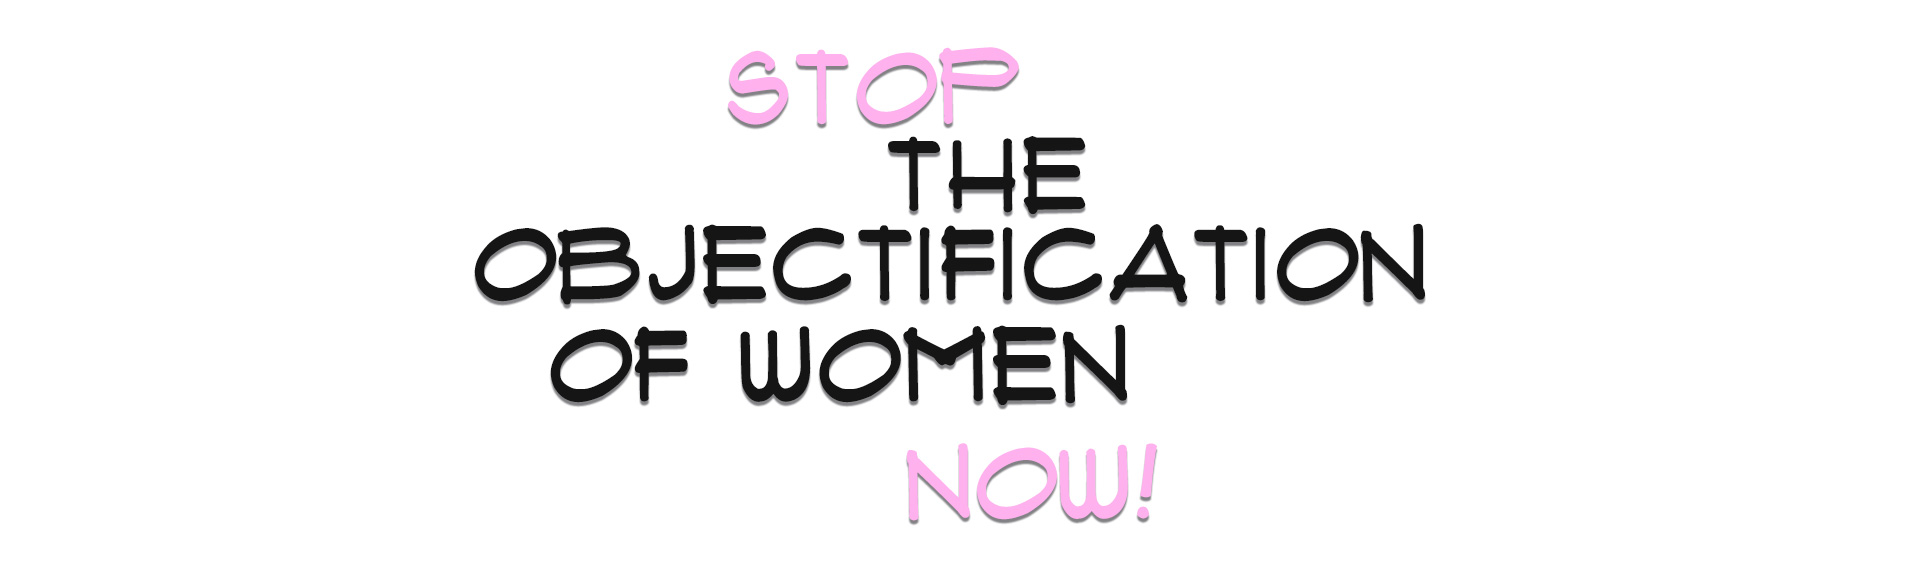 STOP THE OBJECTIFICATION OF WOMEN NOW!